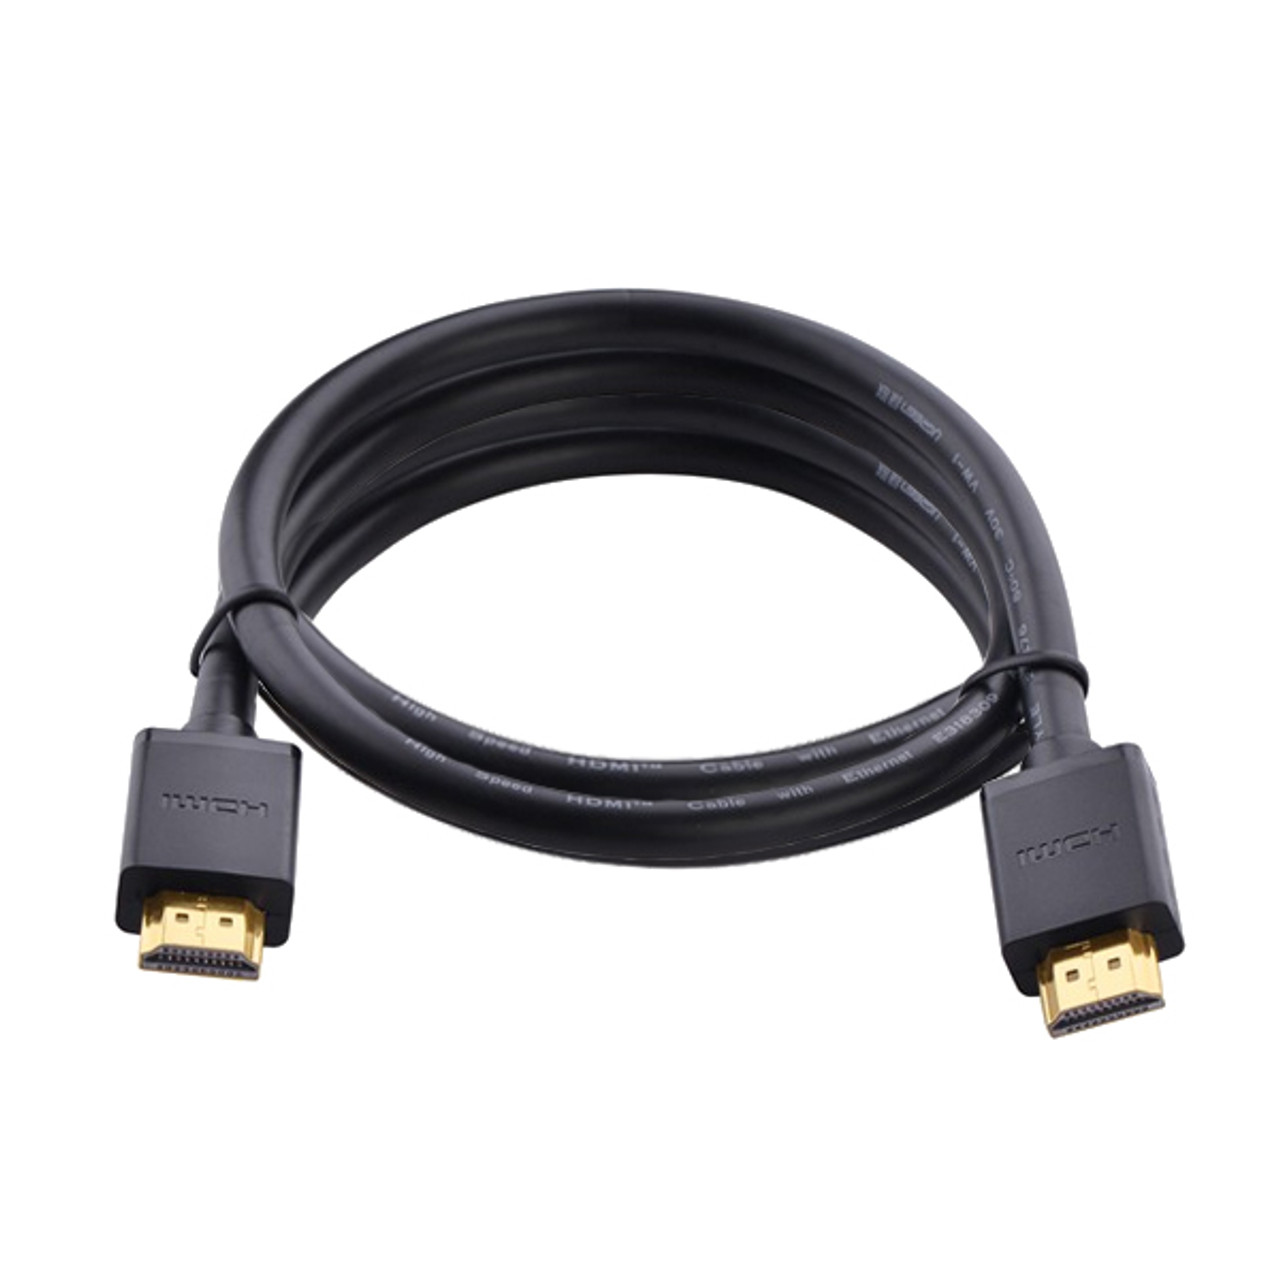 UGREEN Micro HDMI to HDMI Cable Bundle with 4K HDMI to HDMI Cable